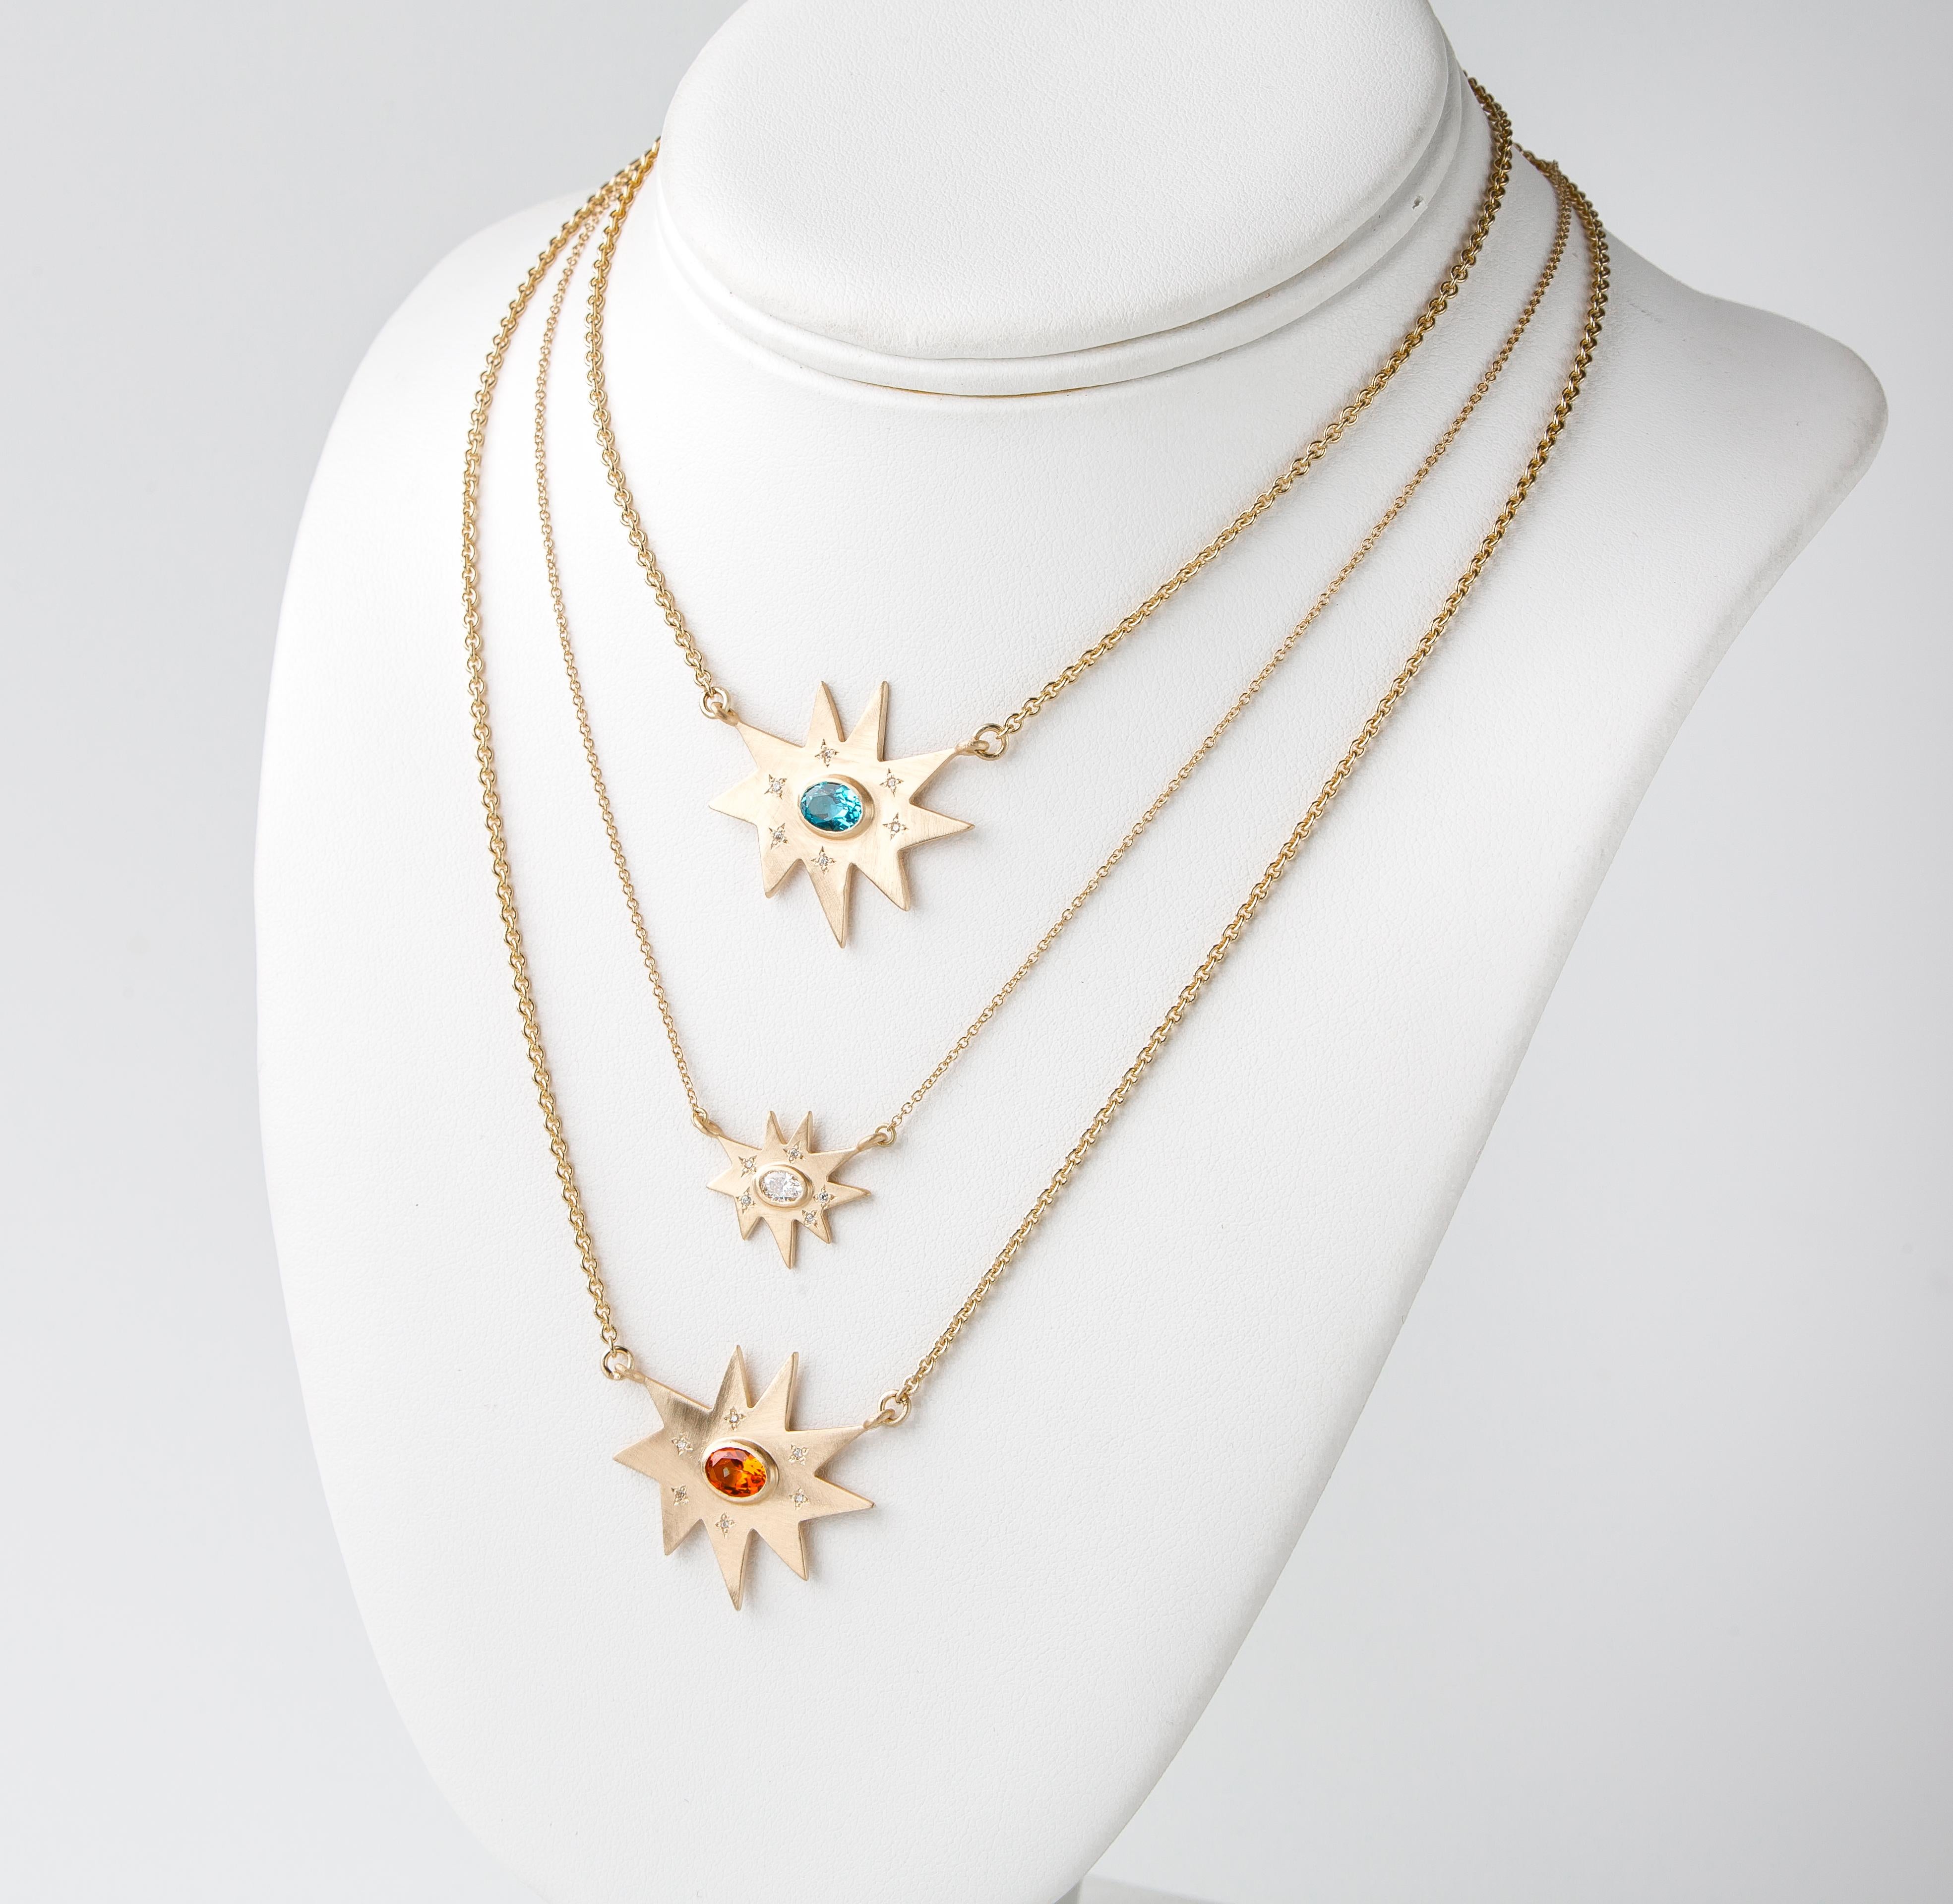 Contemporary Emily Kuvin Gold Necklace with Poppy Passion Topaz and Diamonds